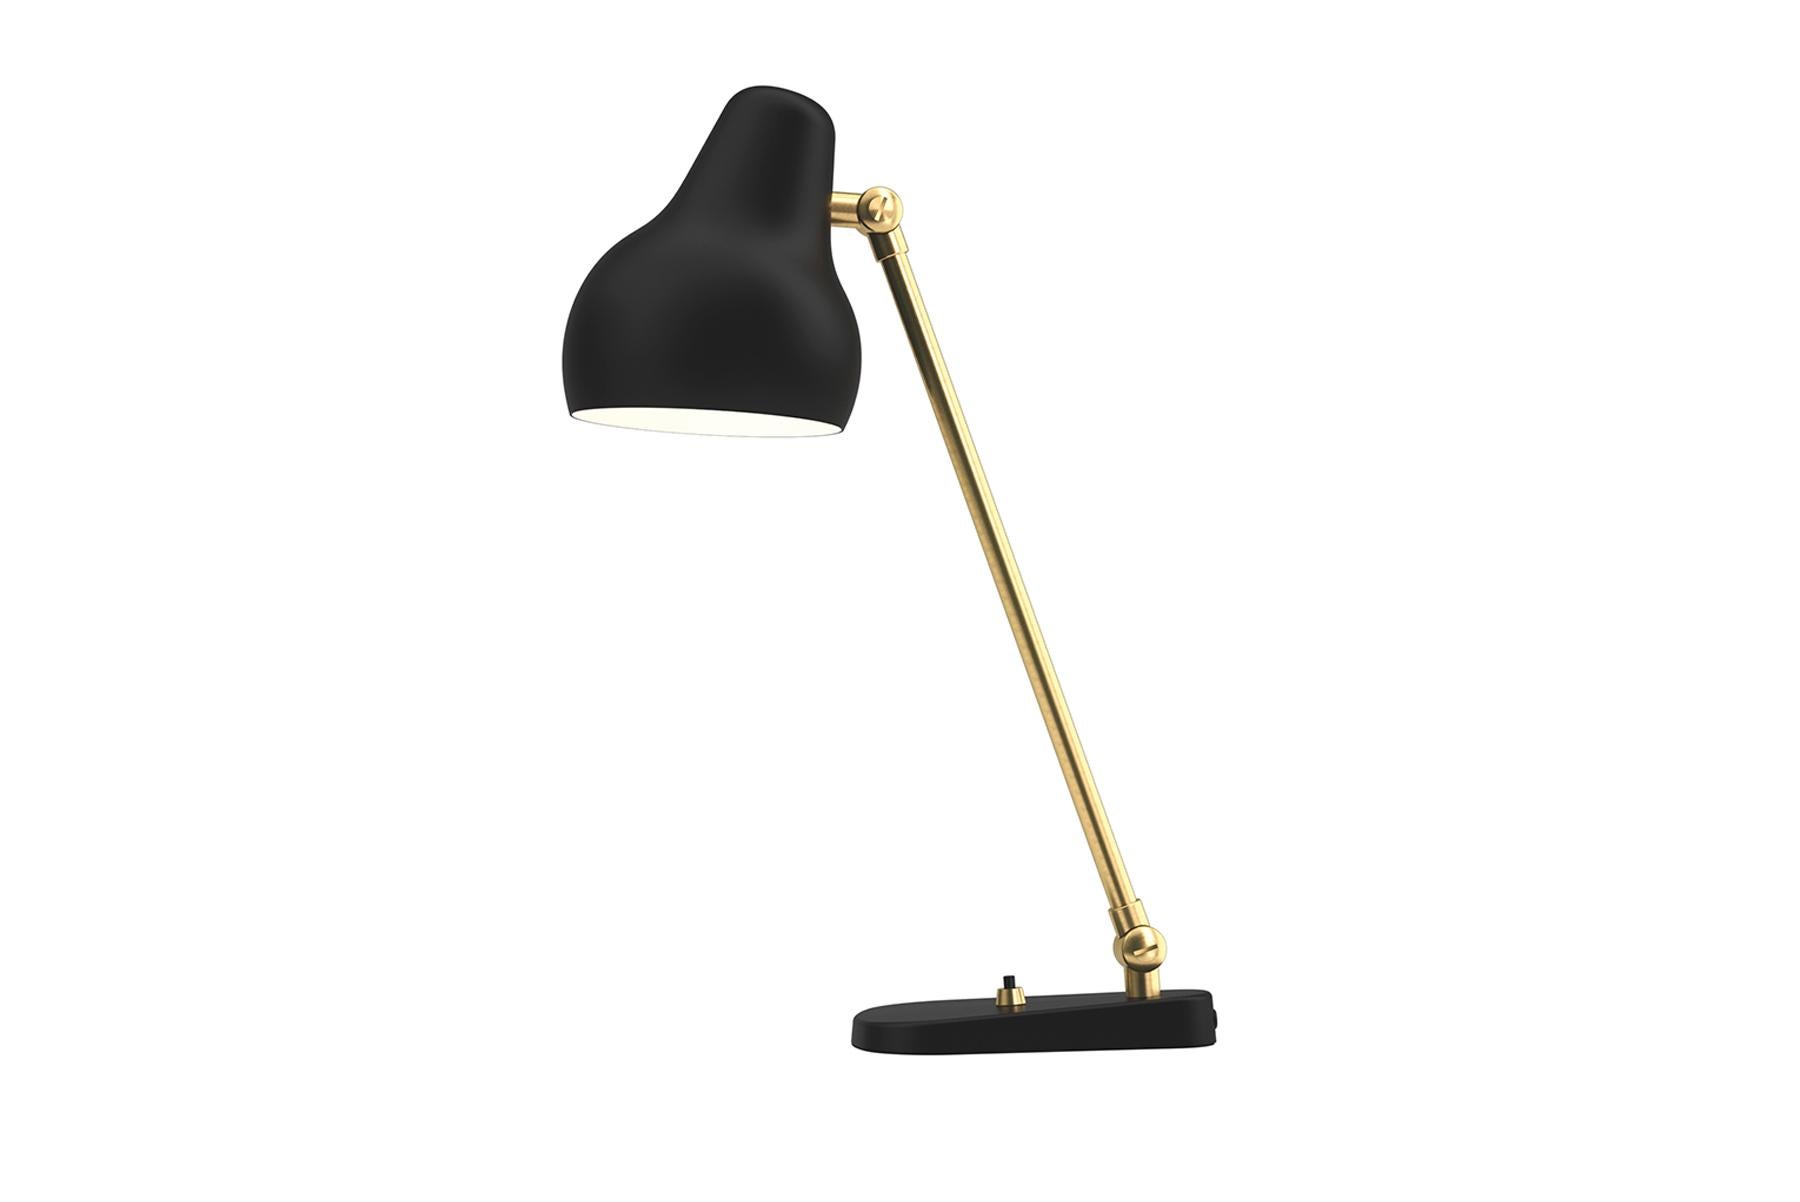 The fixture emits downward directed light. The angle of the shade can be adjusted to optimize light distribution. The shade is painted white on the inside to ensure a soft comfortable light. The VL38 table lamp was originally designed in the late